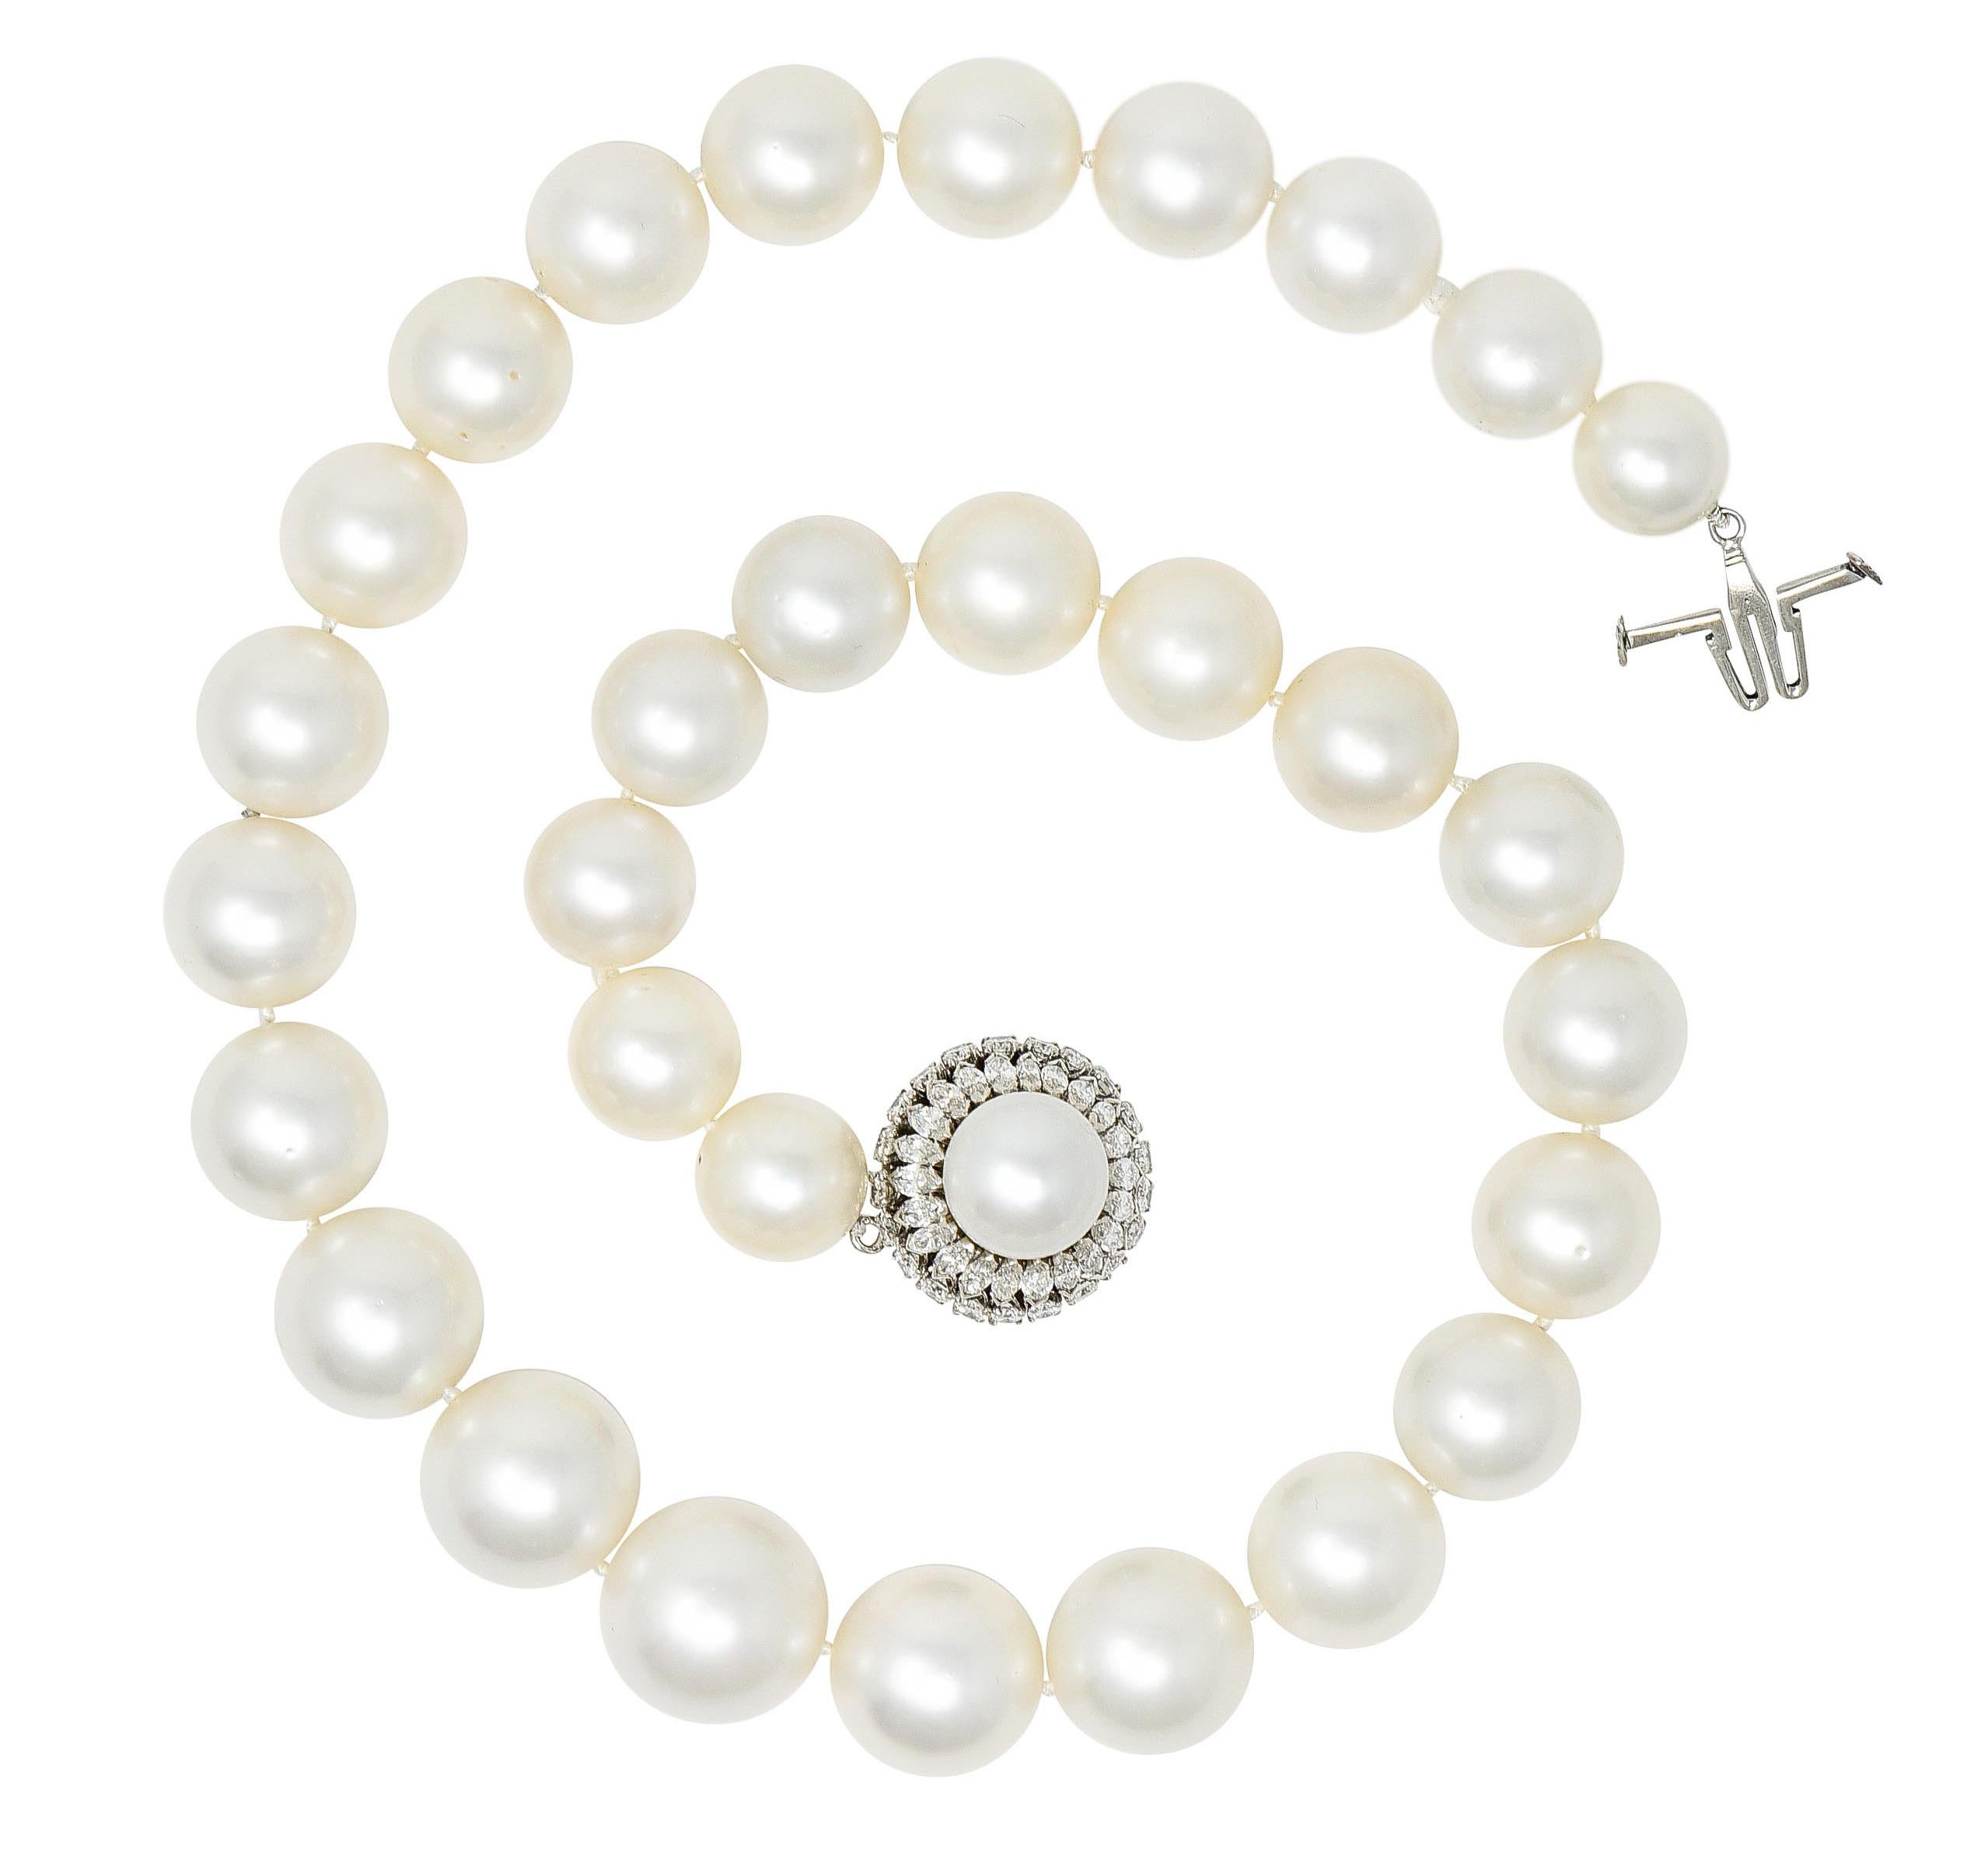 Strand necklace is comprised of Cultured pearls - hand-knotted

Graduating in size from 12.5 mm to 17.0 mm - well matched in white body color

Exhibiting subtle to moderate rosè overtones and featuring good to very good luster

Clasp is ornately